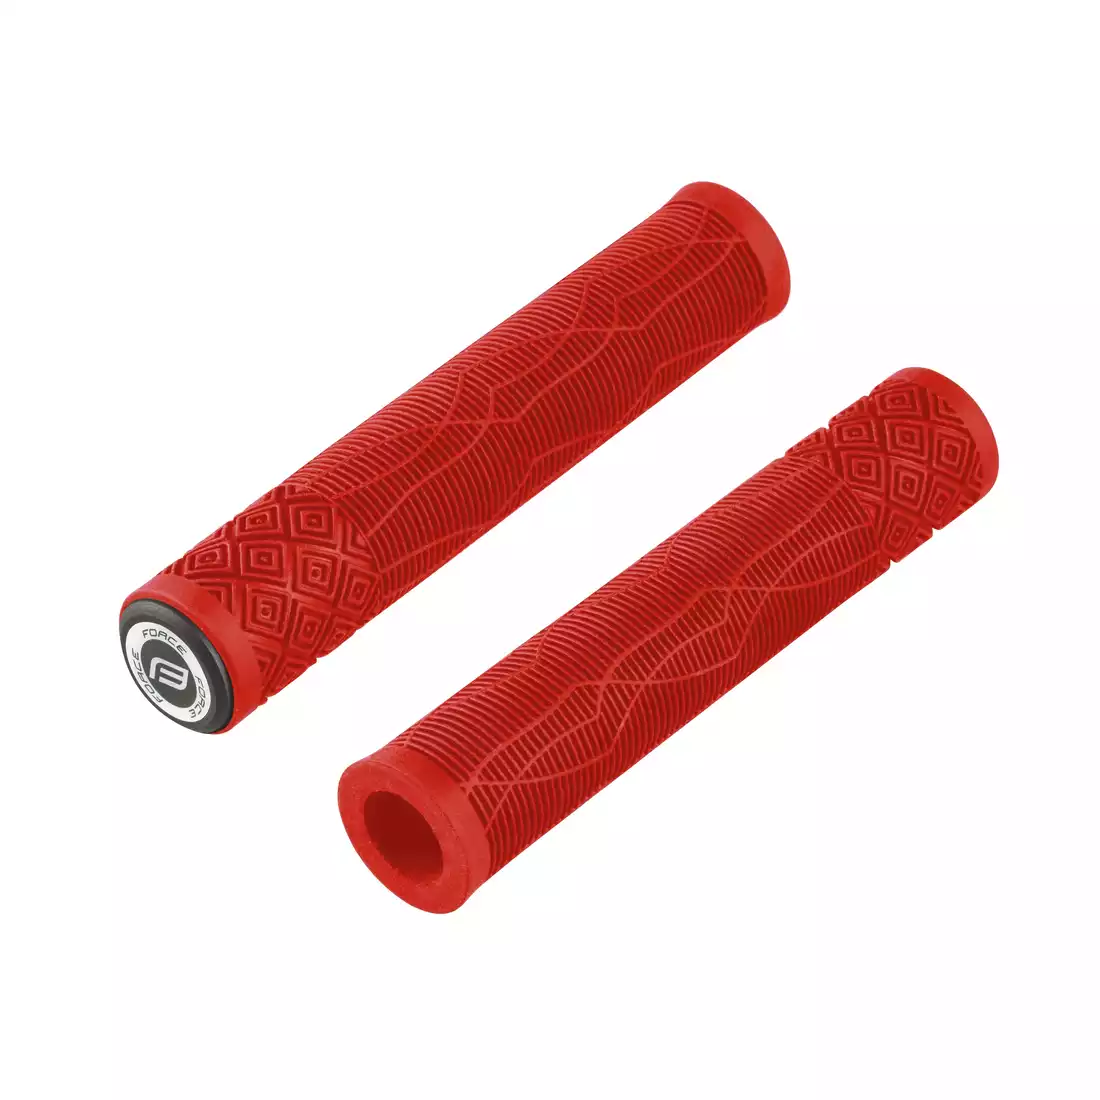 FORCE BMX160 Bicycle handlebar grips, red